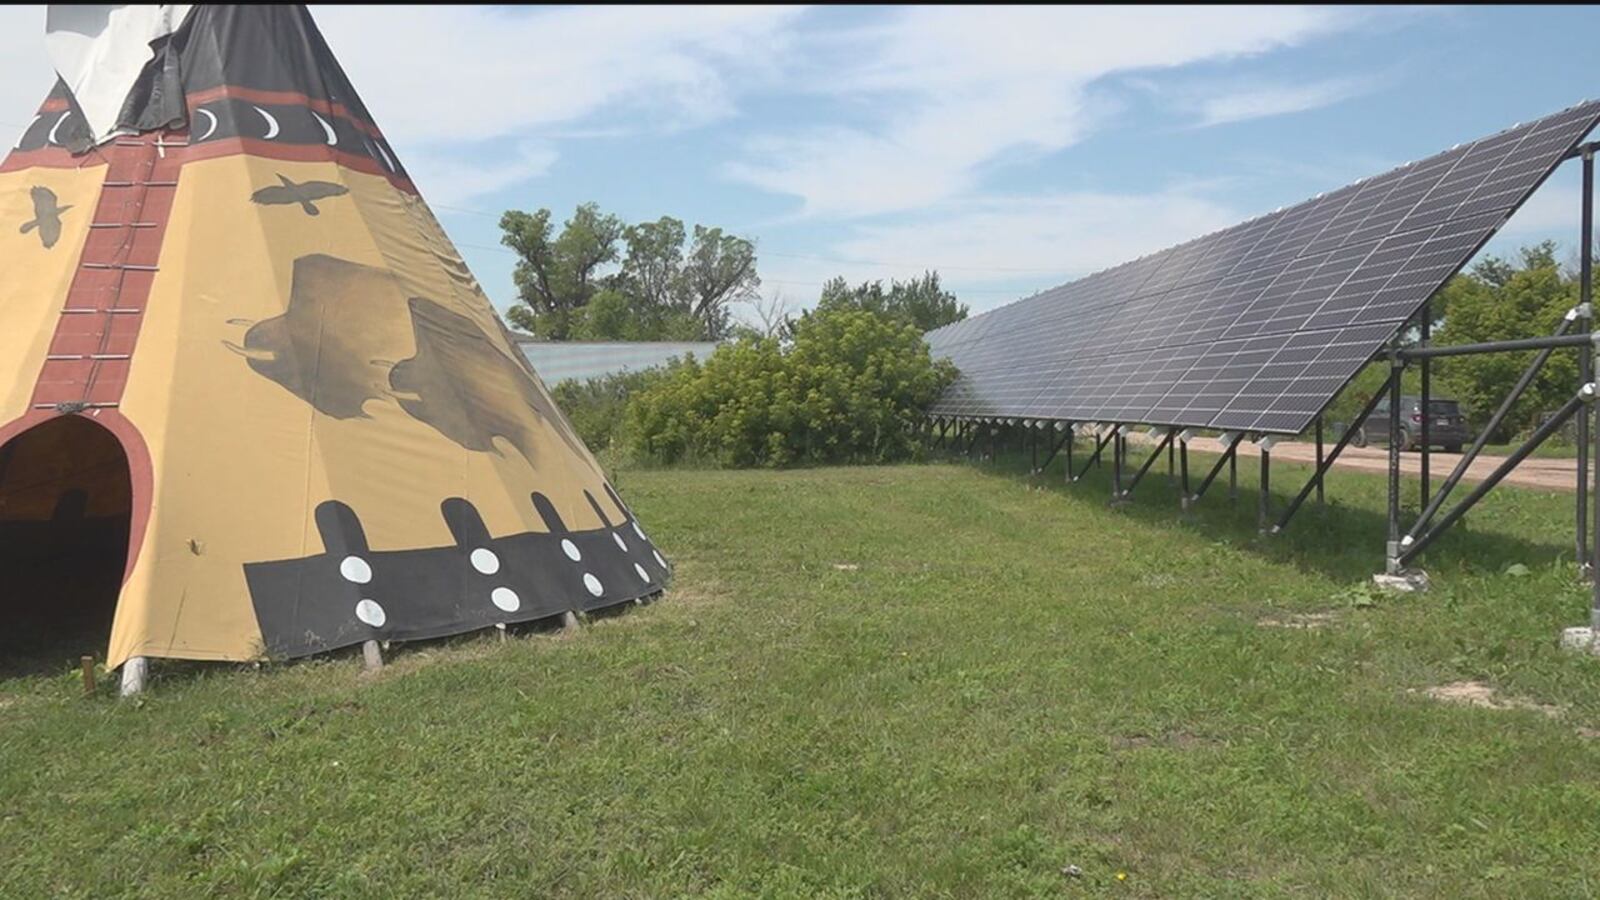 Photo of Tipi and Solar Panels on a grassy field